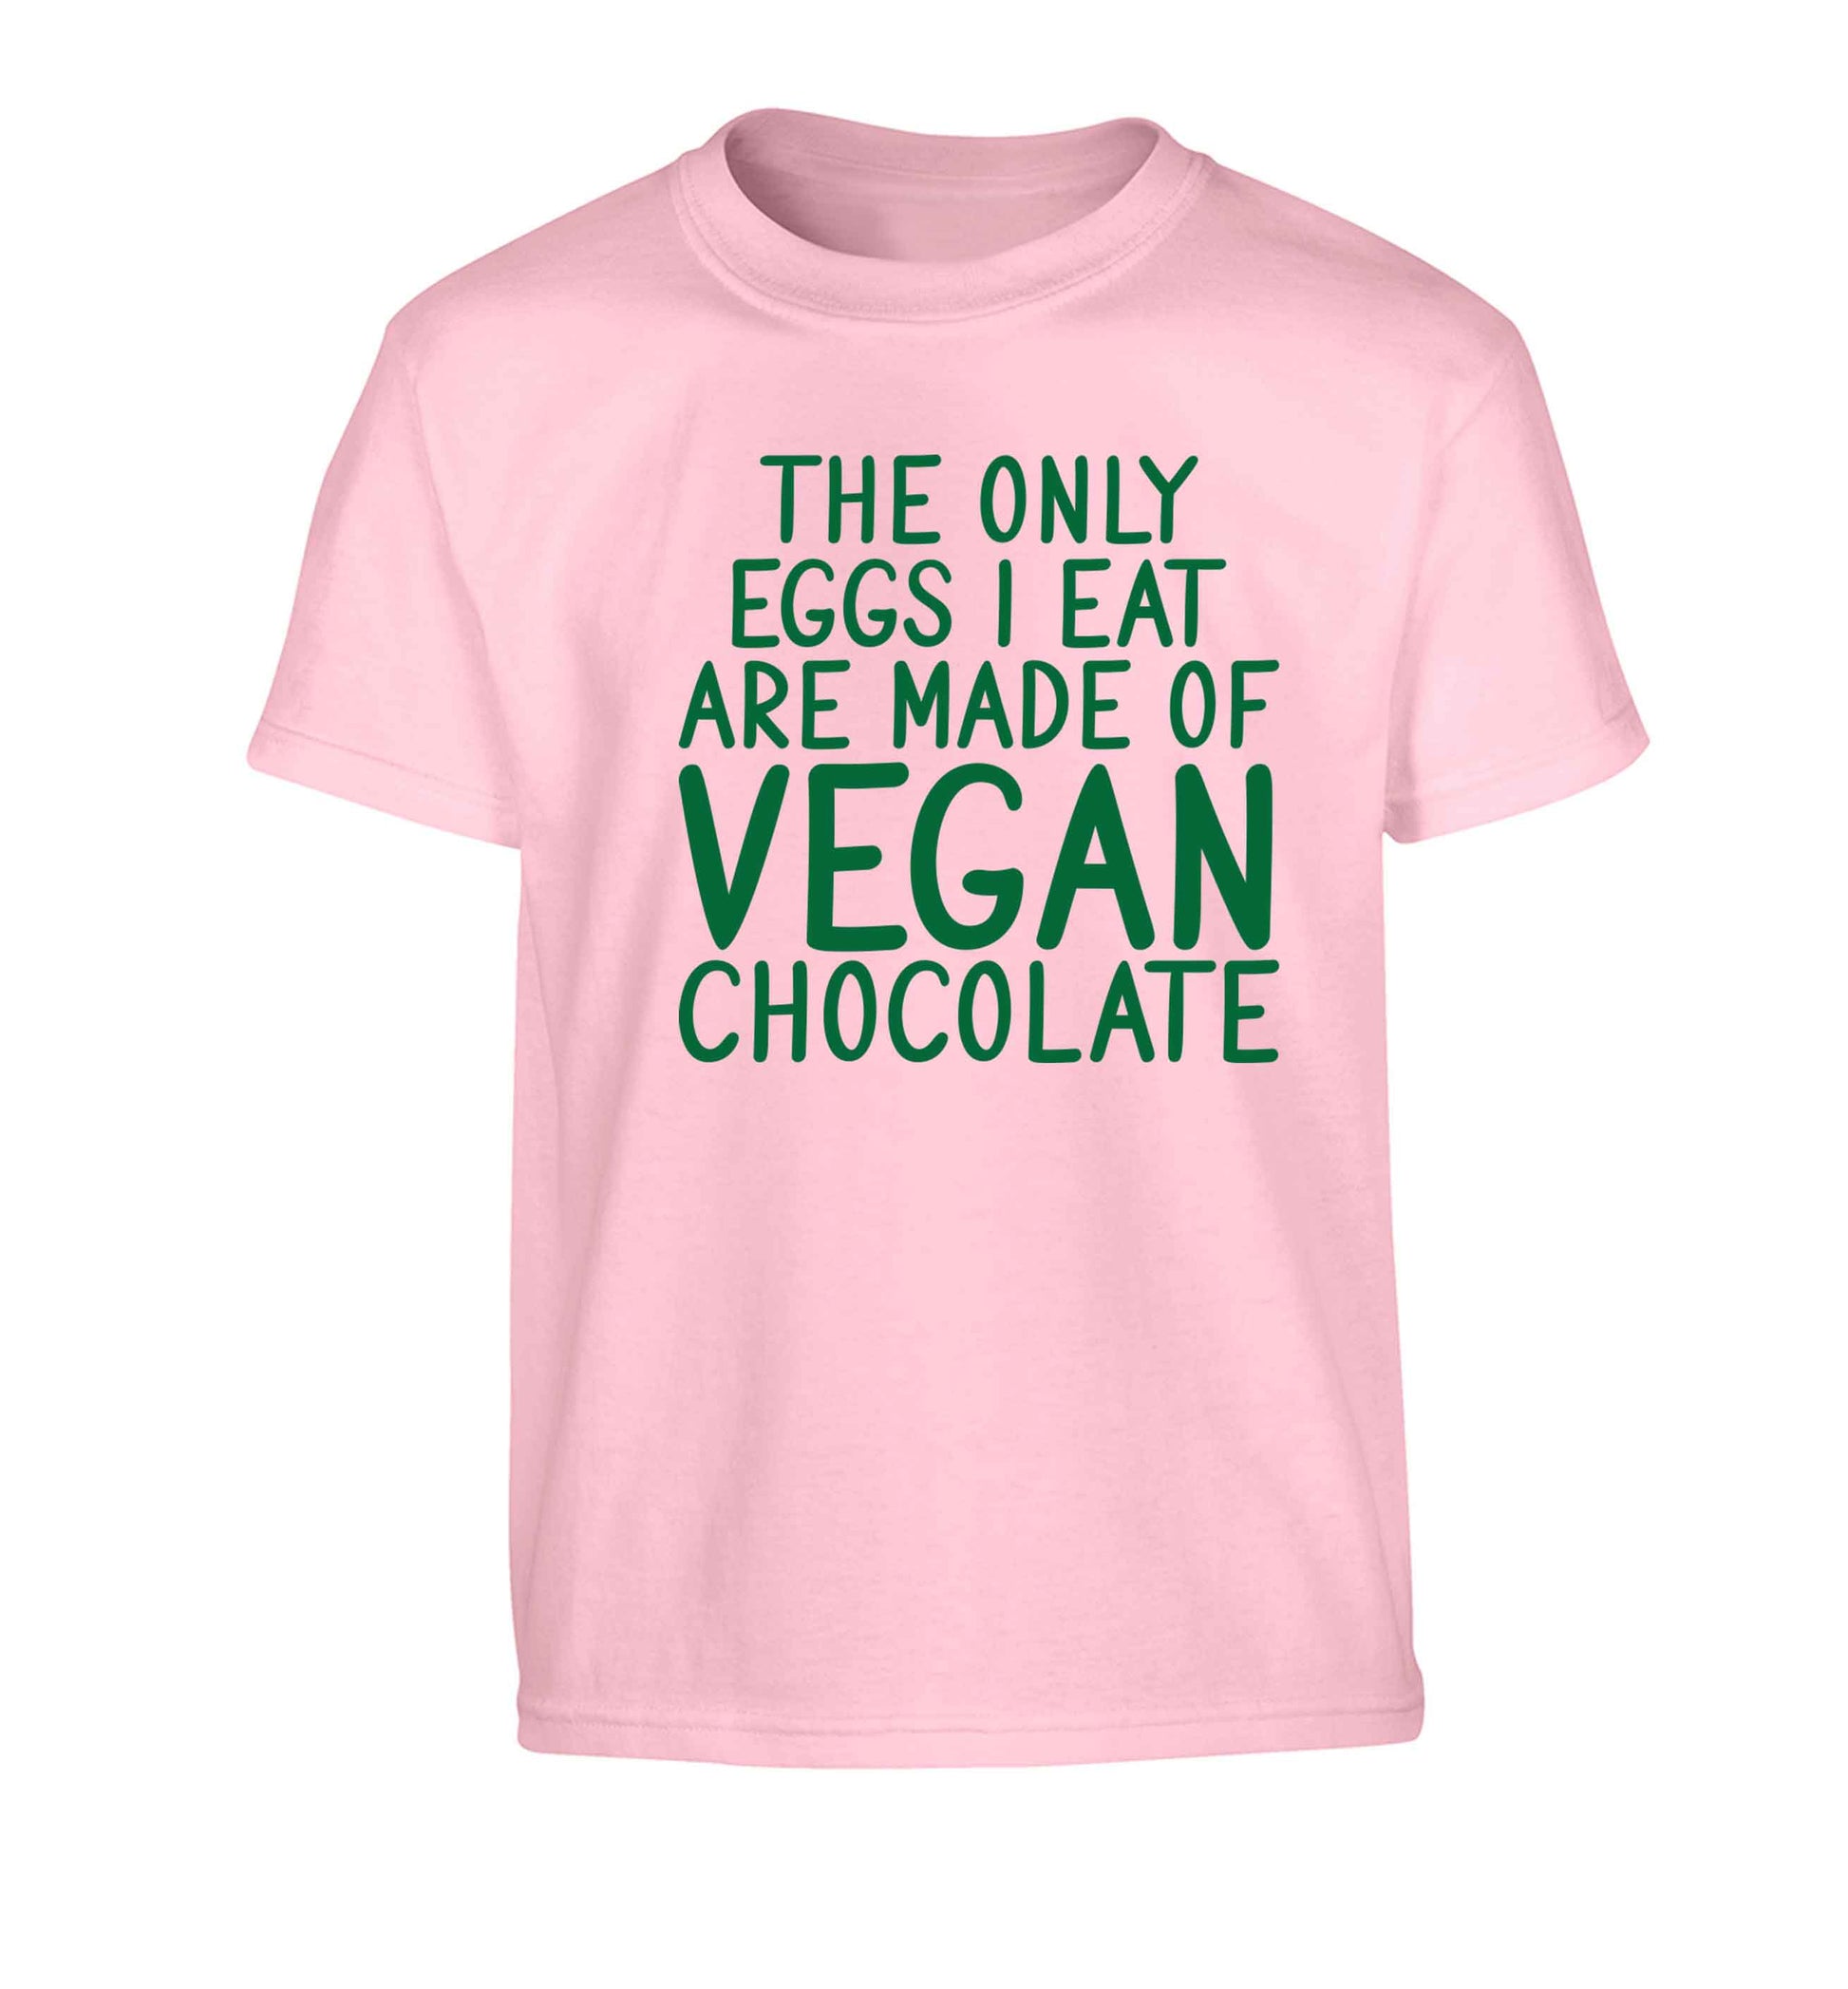 The only eggs I eat are made of vegan chocolate Children's light pink Tshirt 12-13 Years